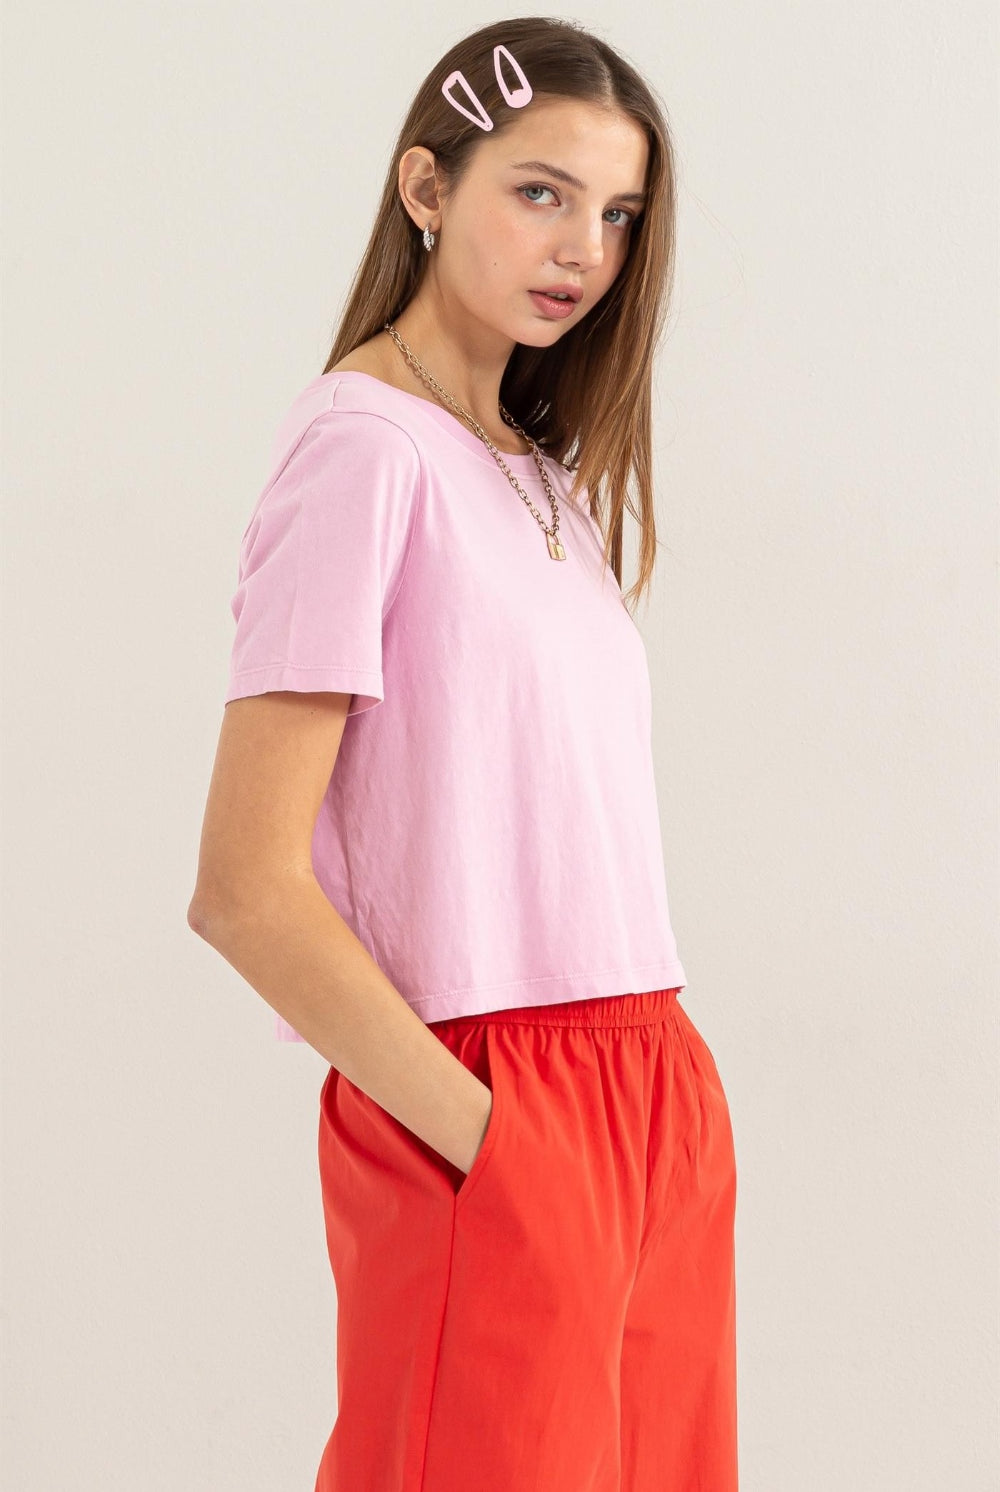 A model showcases a pastel pink HYFVE Round Neck Cropped T-Shirt, paired with vibrant red trousers. The tee has a relaxed fit, short sleeves, and a classic round neckline, exemplifying casual comfort with a touch of modern style. This image is presented to feature the product available for purchase at GemThreads Boutique, highlighting the garment's color and design for potential customers.